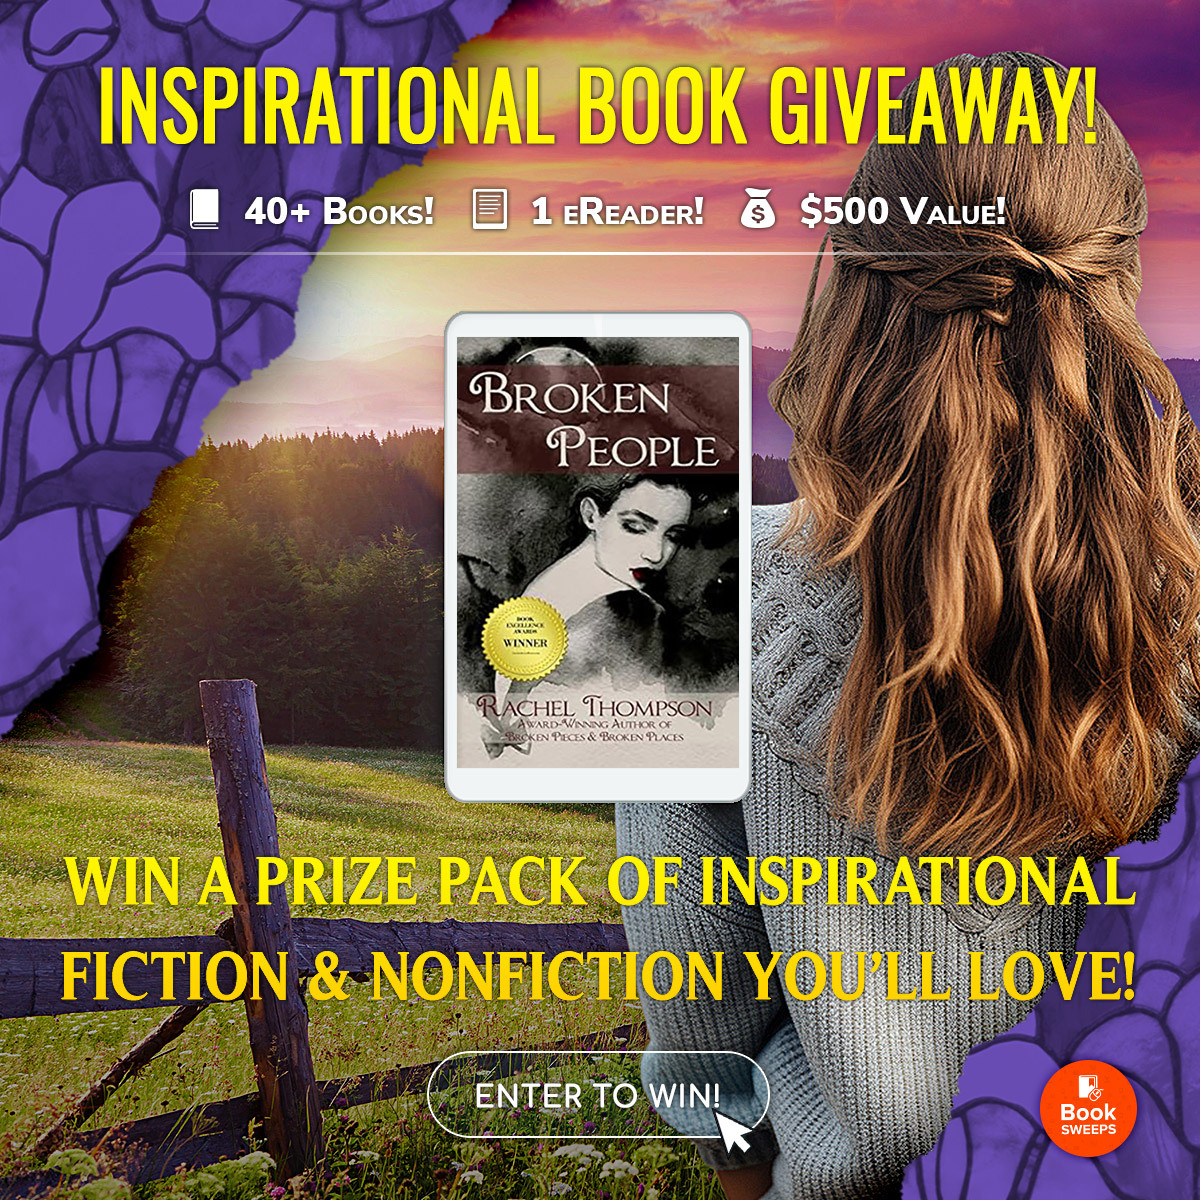 Enter for a chance to win #Inspirational #Fiction and #Nonfiction books from your favorite bestselling and award-winning authors,  including BROKEN PEOPLE  by @RachelintheOC, via @BookSweeps, plus a brand-new Kindle Fire! bit.ly/inspirational-…

 #MustRead #Books #Kindle